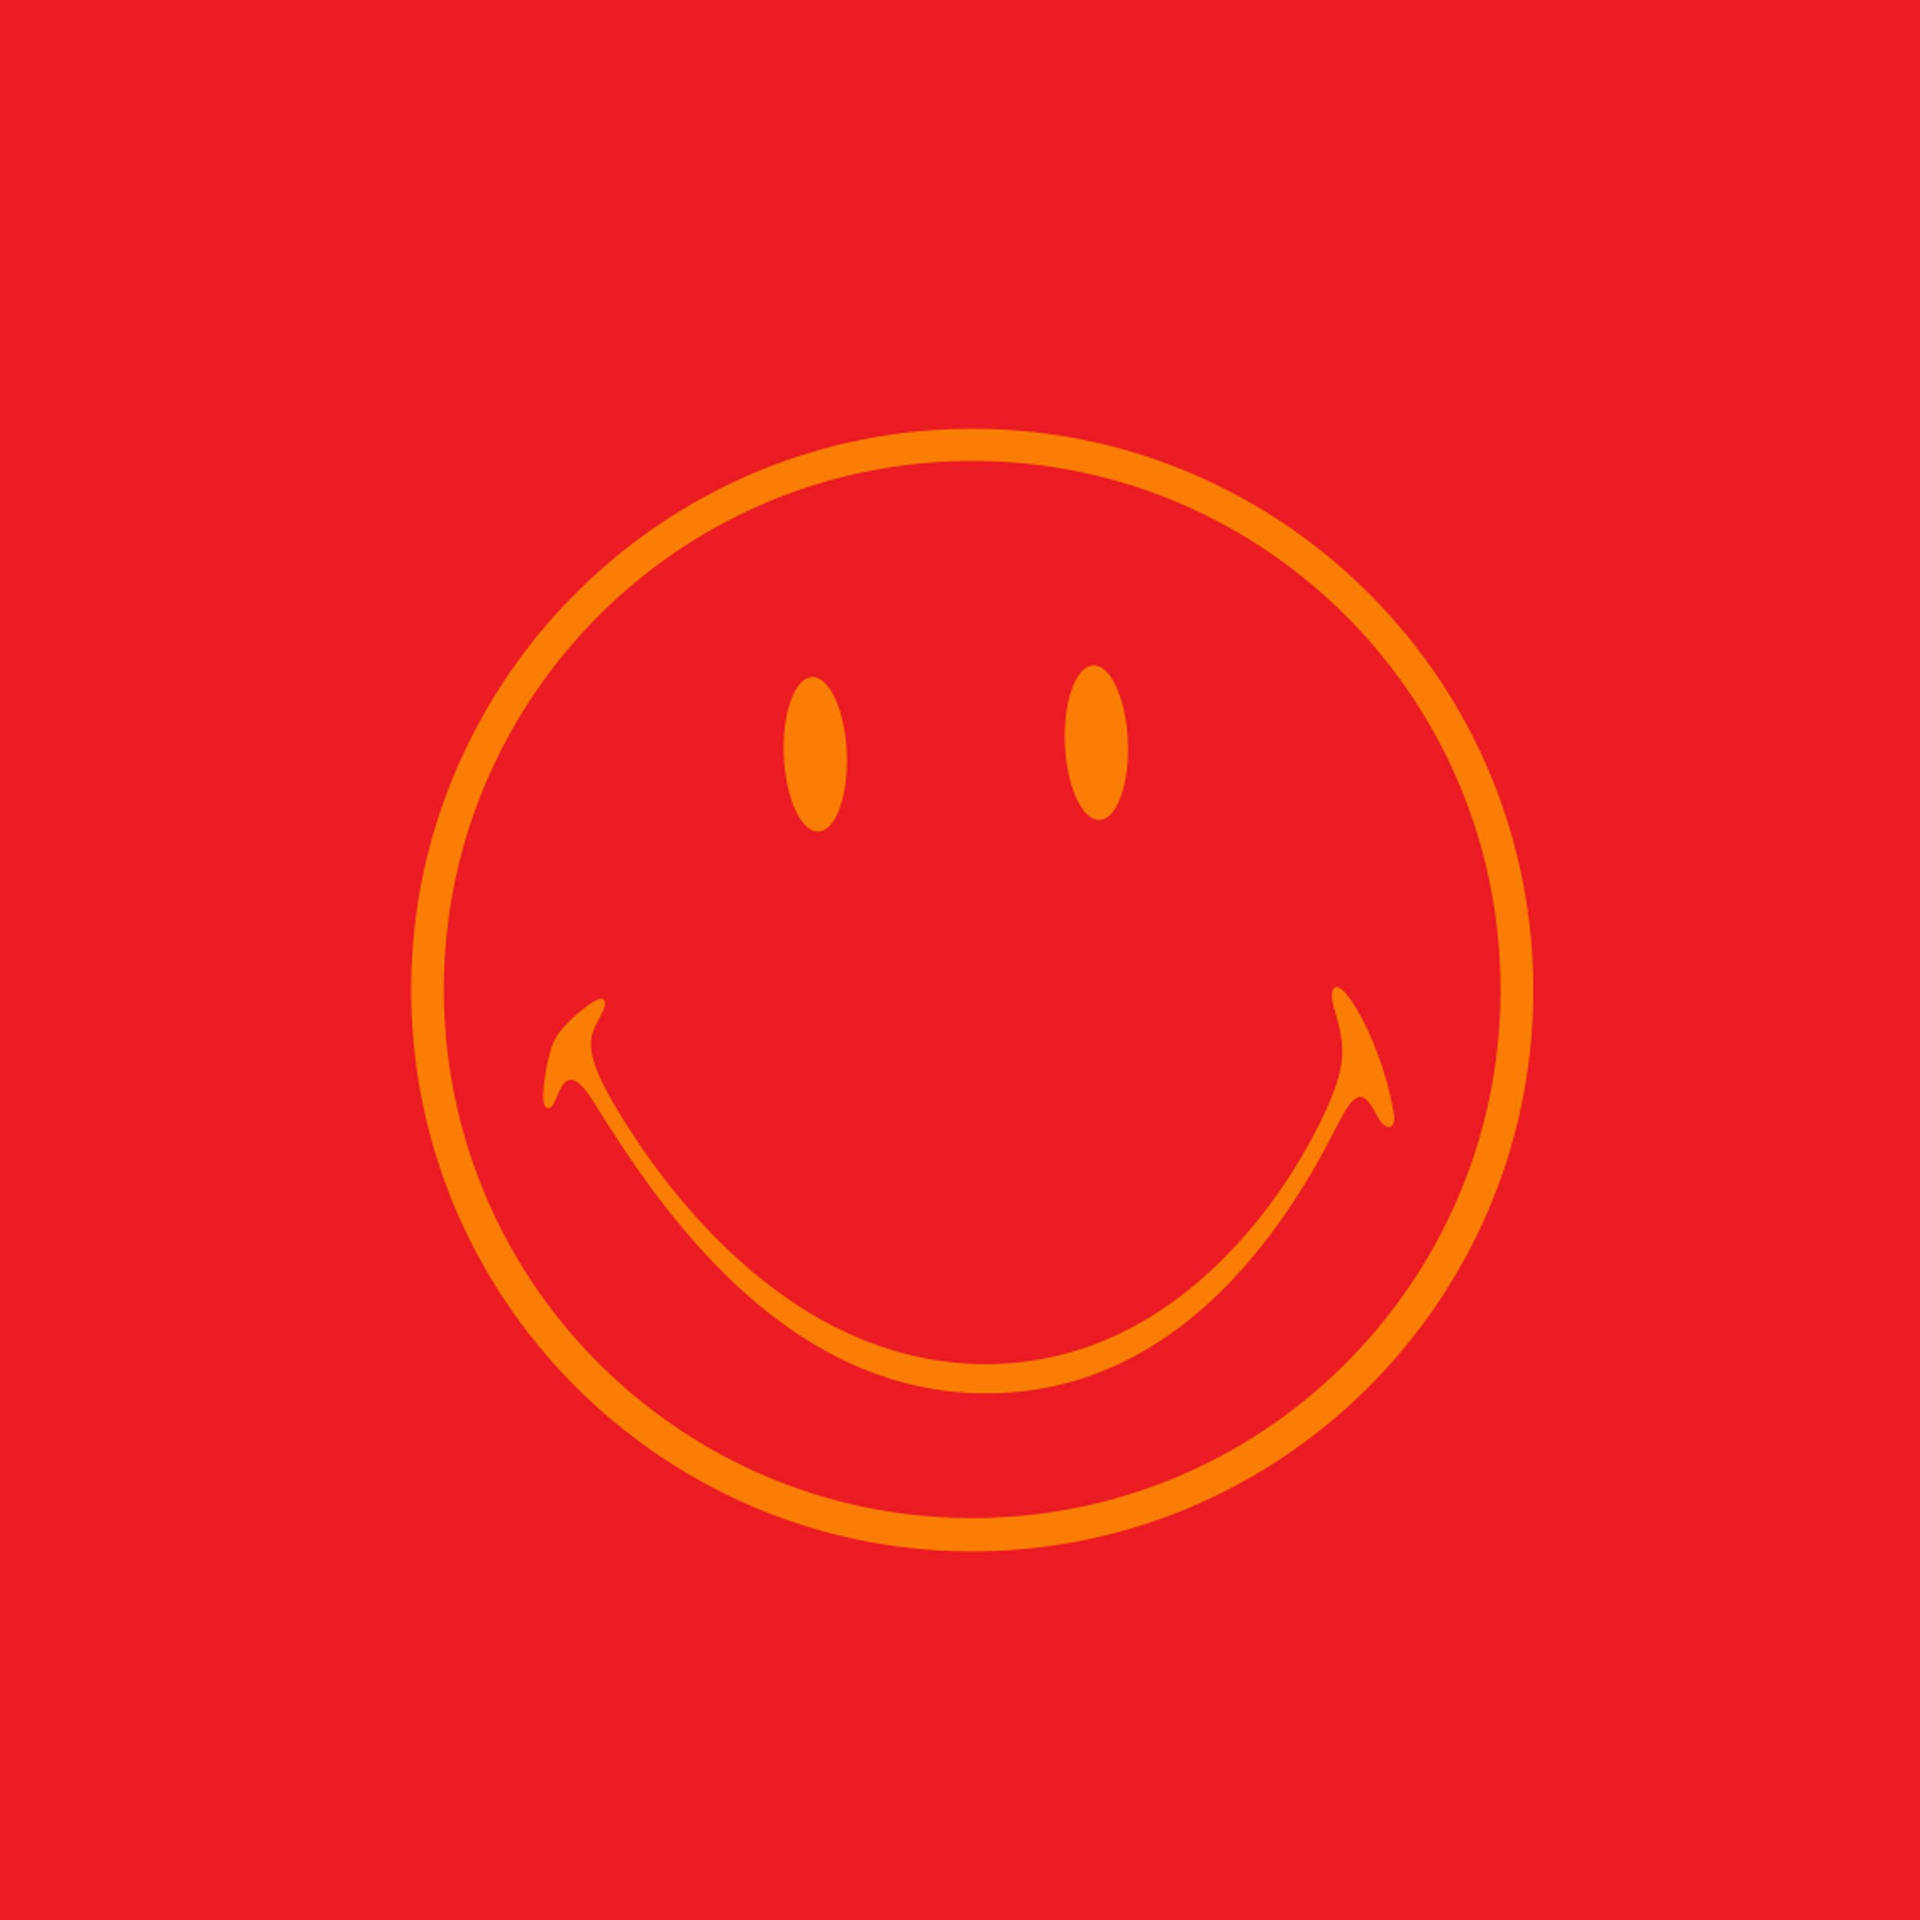 Preppy Smiley Face On Plain Red